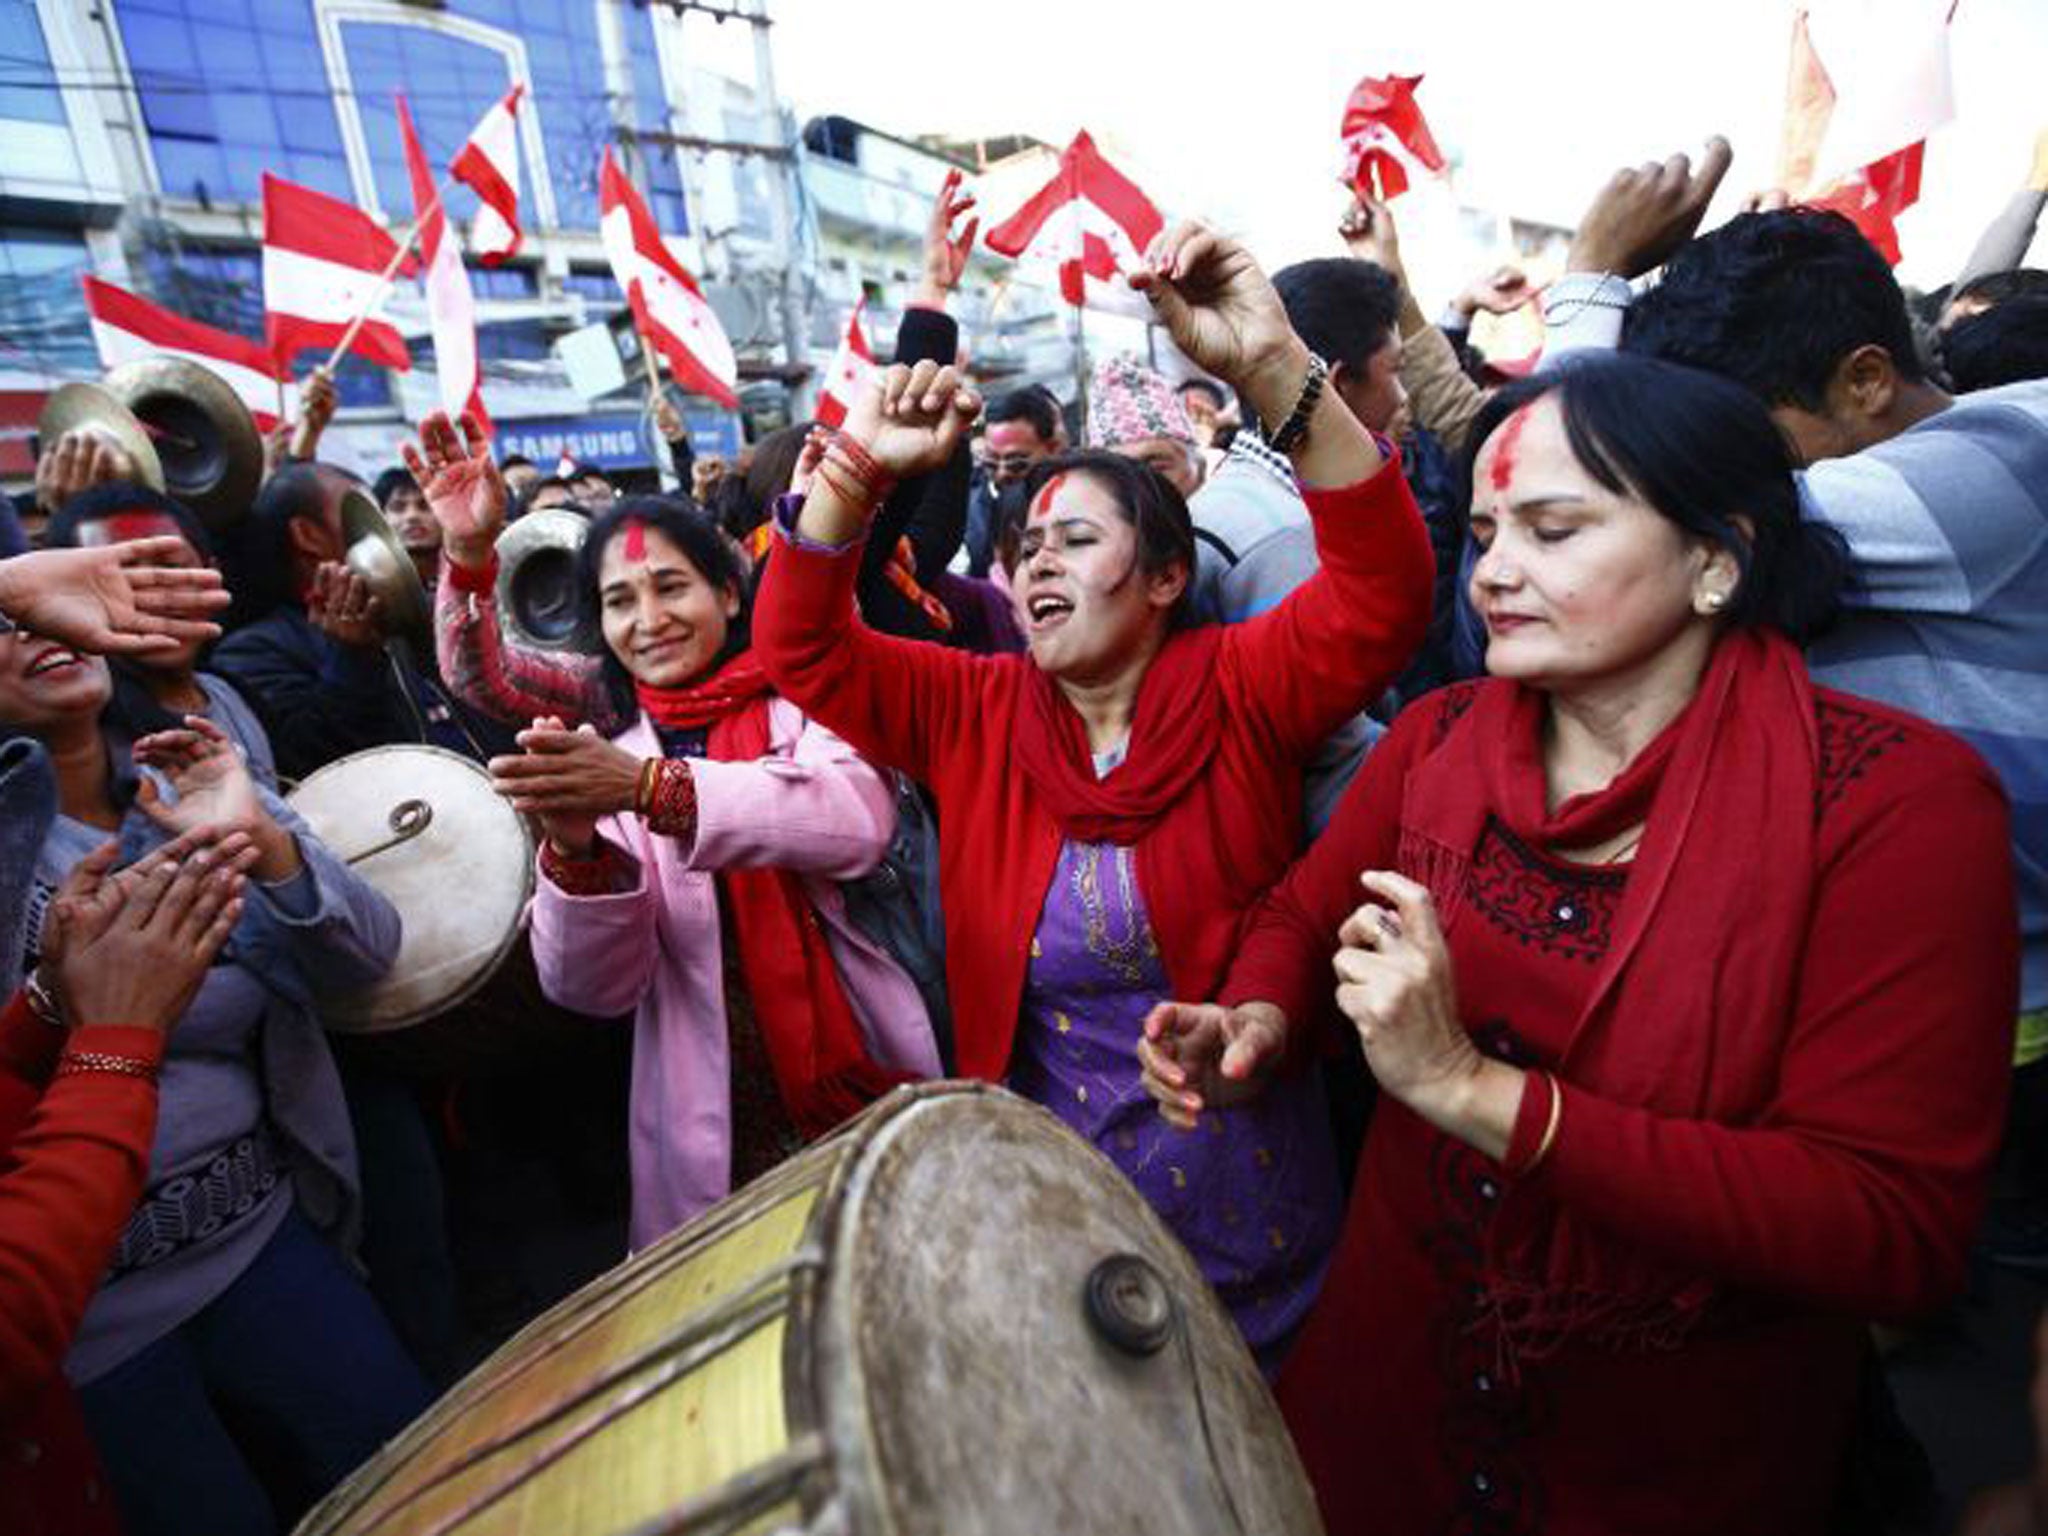 Supporters of Nepali Congress Party cheer for their party at the Constituent Assembly Elections